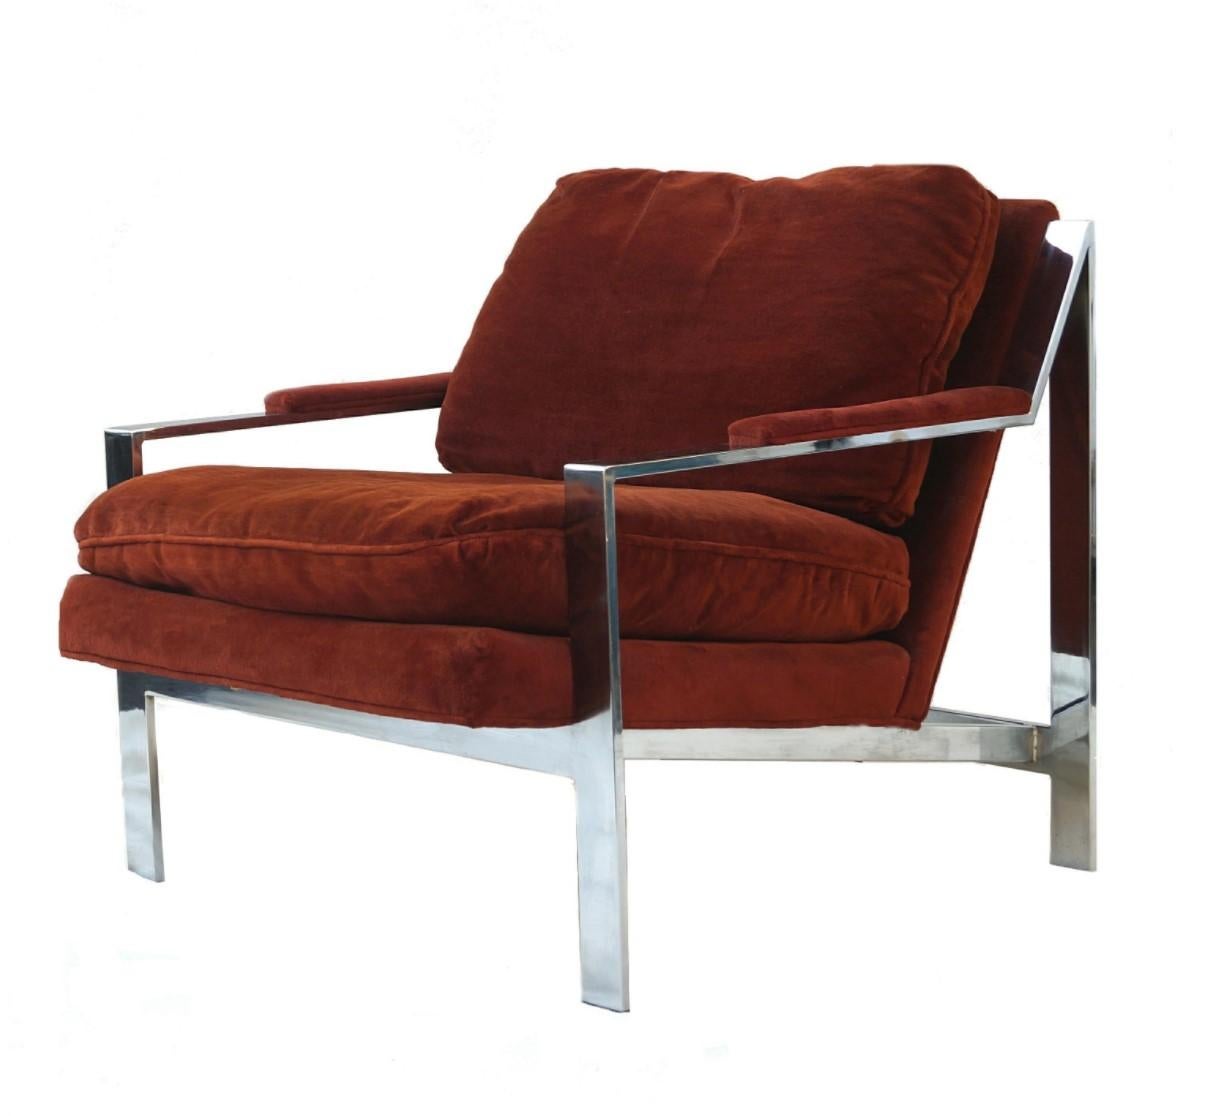 Other Pair of Cy Mann Mid-Century Modern Chrome Lounge Chairs